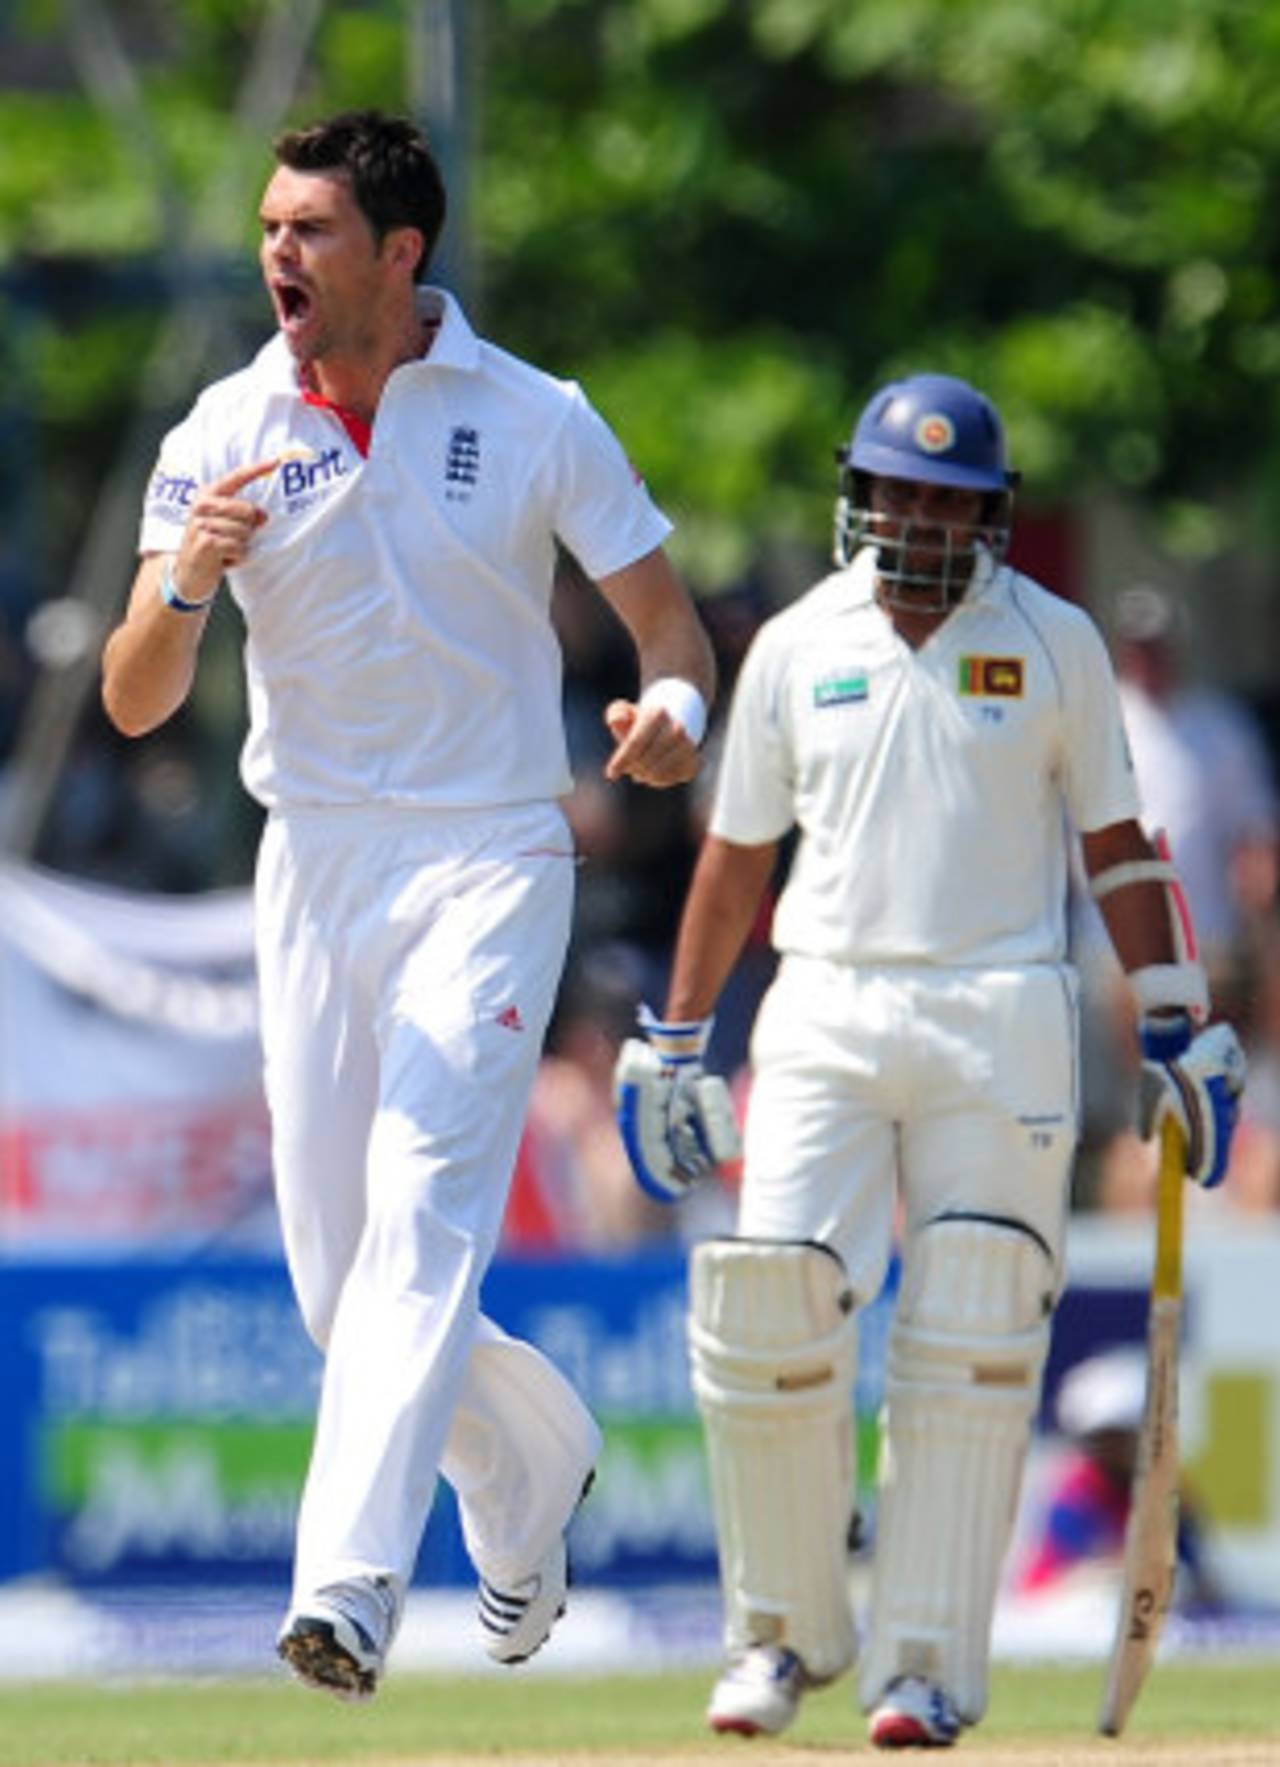 James Anderson is pumped up after a strike, Sri Lanka v England, 1st Test, Galle, 1st day, March 26, 2012